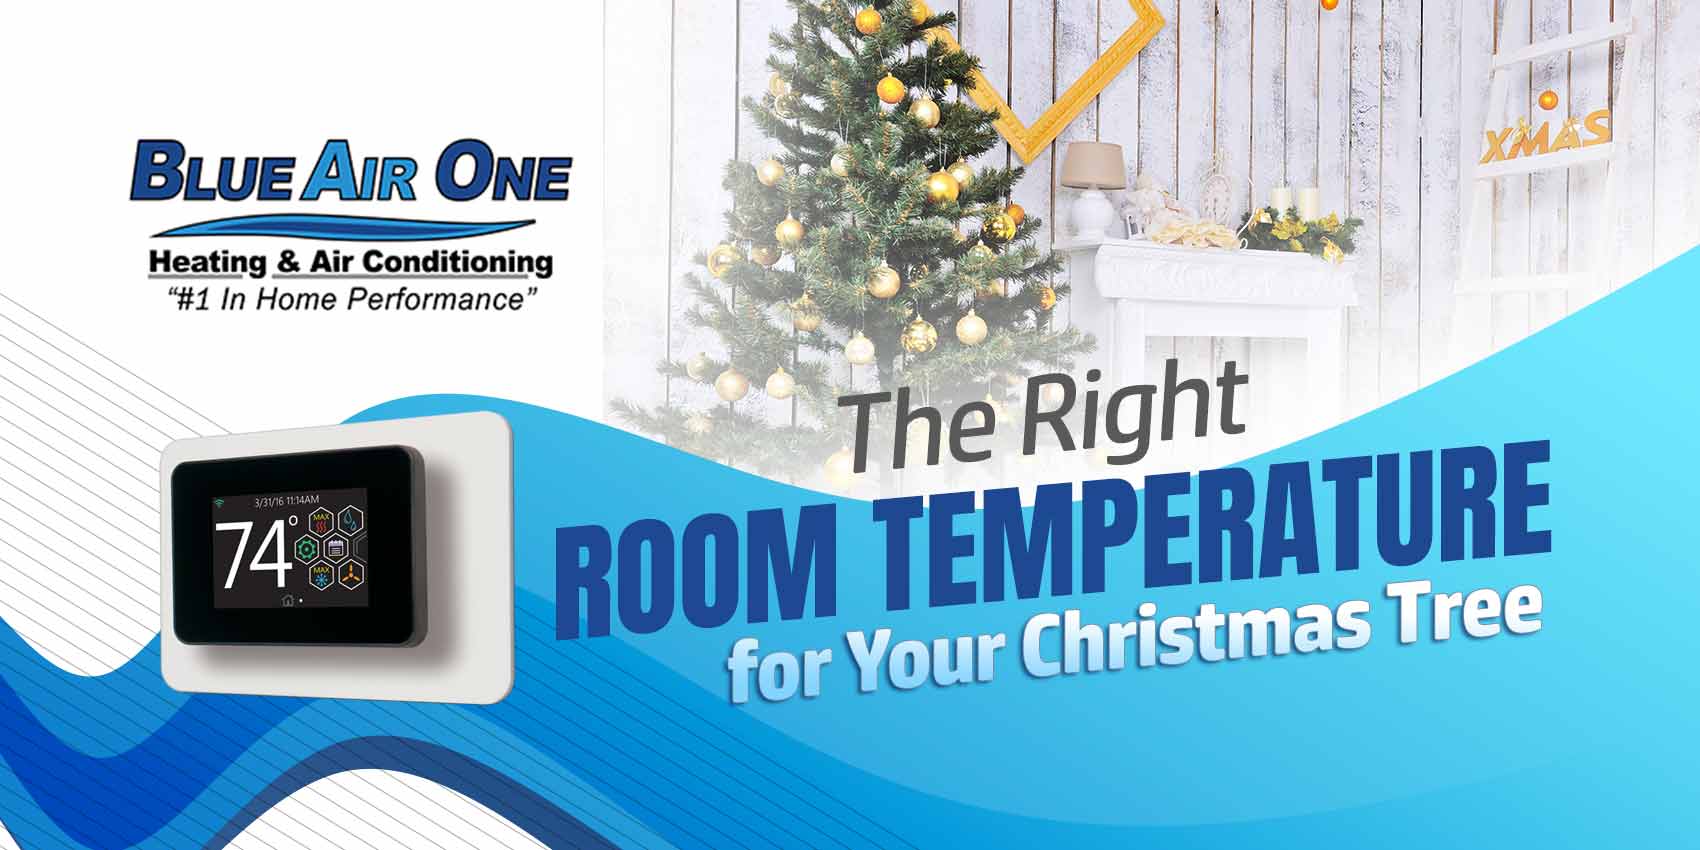 The Right Room Temperature for Your Christmas Tree